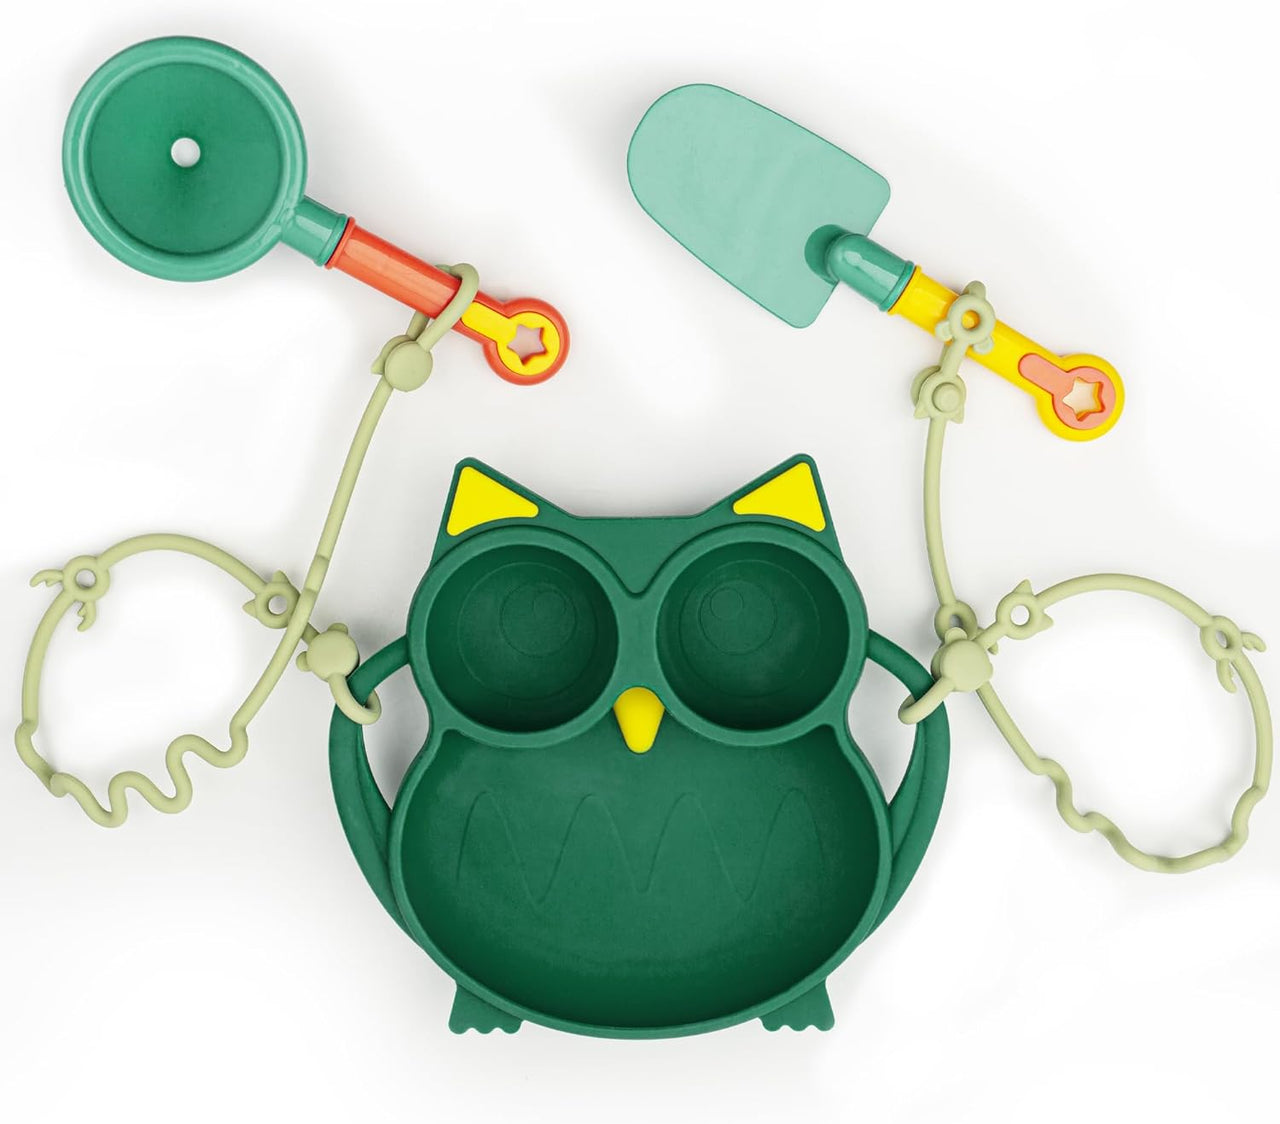 Silicone Suction Plate with 2 Adjustable Straps. Non-slip Divided Kids Plate Set for Baby Toddlers. Dishwasher Safe (Owl. Green)